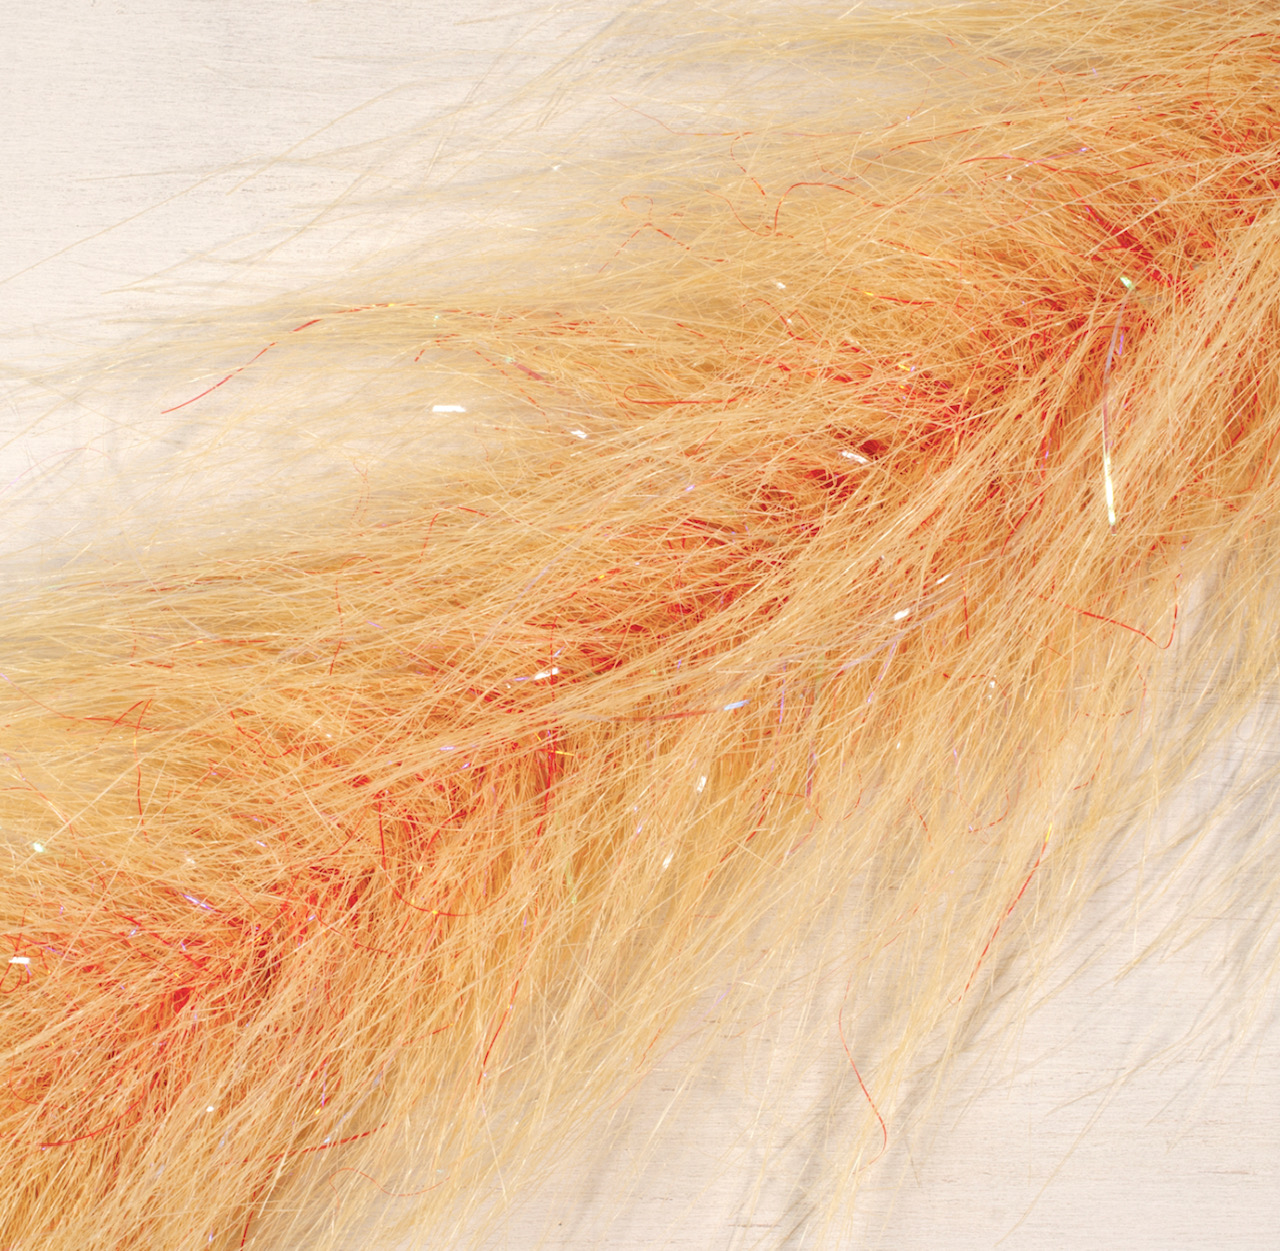 Fair Flies 5D Brushes - Charly Sand/Red